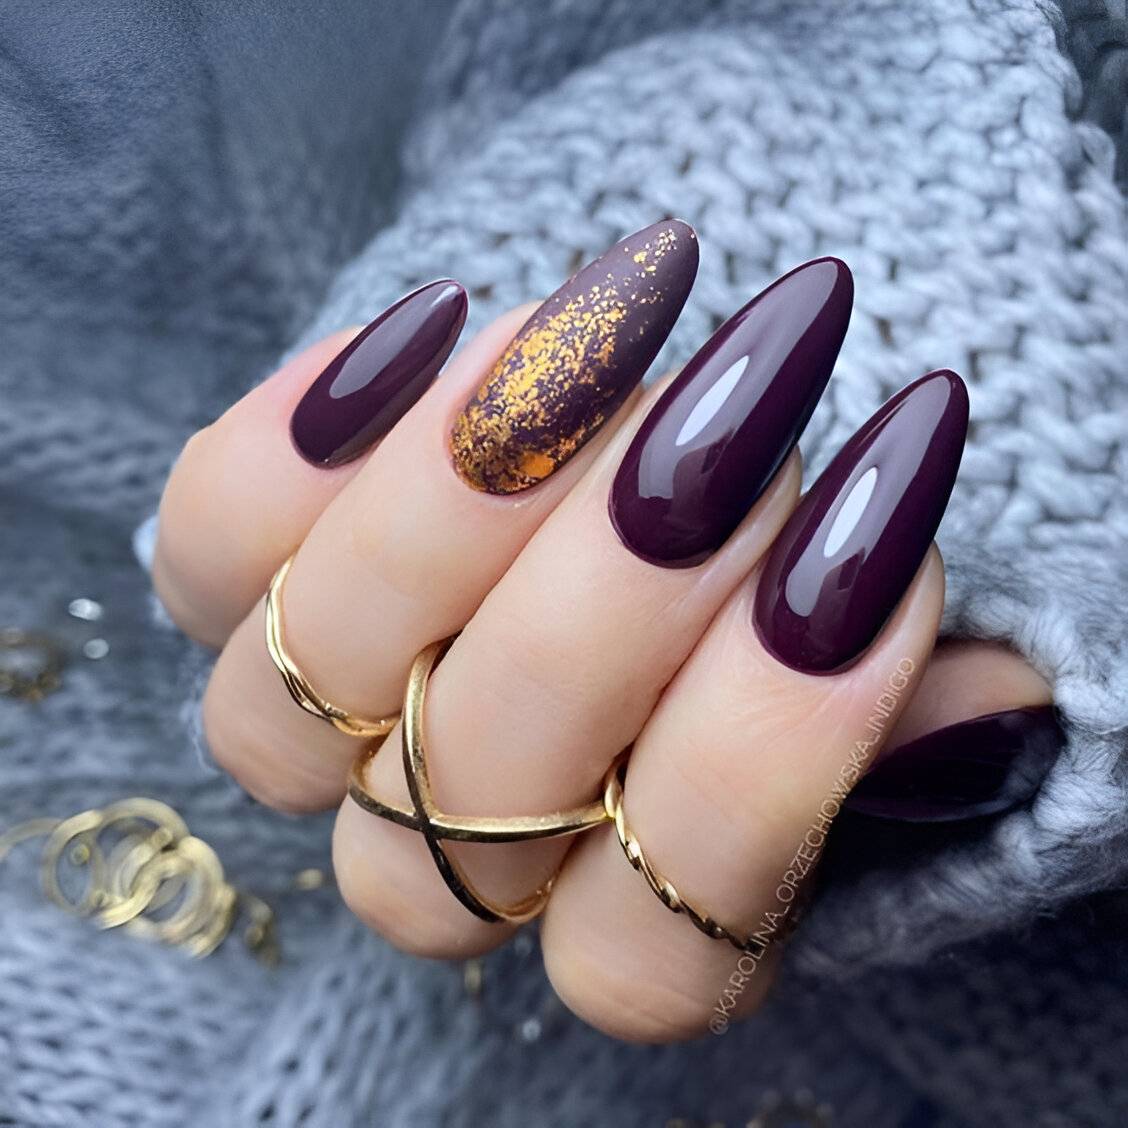 30 Autumn Nail Designs Too Chic To Resist - 237